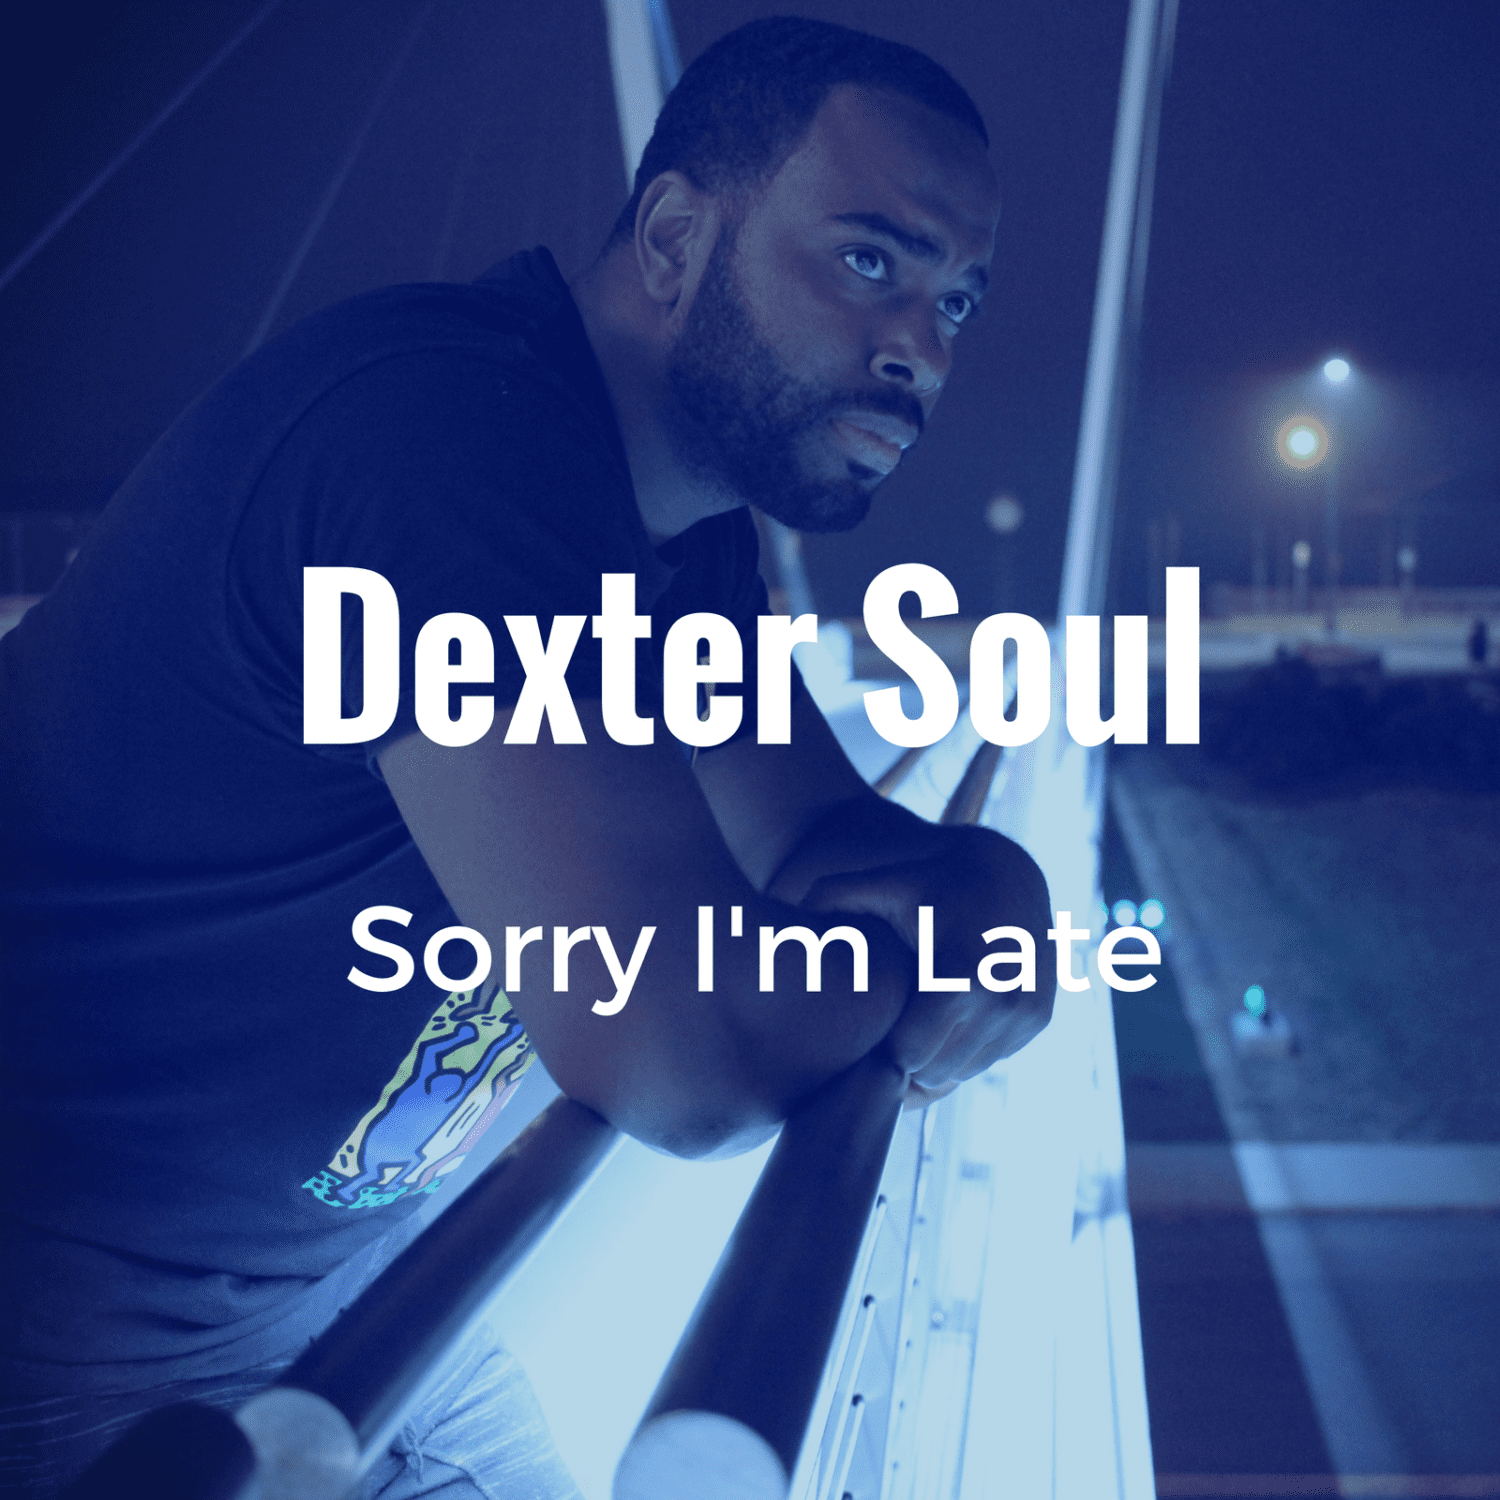 Dexter Soul Drops New EP - "Sorry I'm Late"